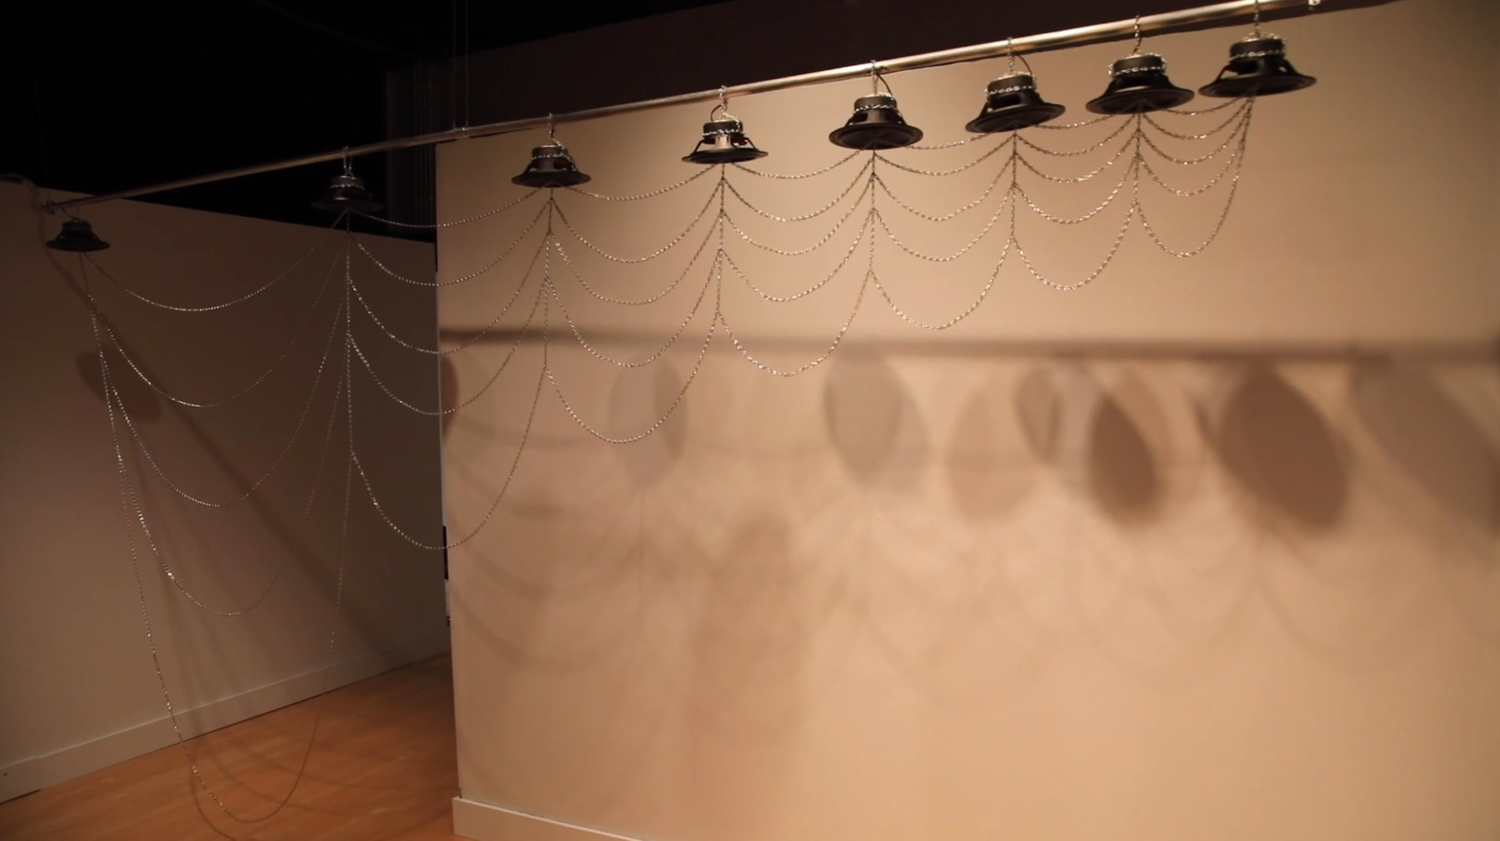 a sculpture consisting of 8 speakers hanging from a bar, connected by chains